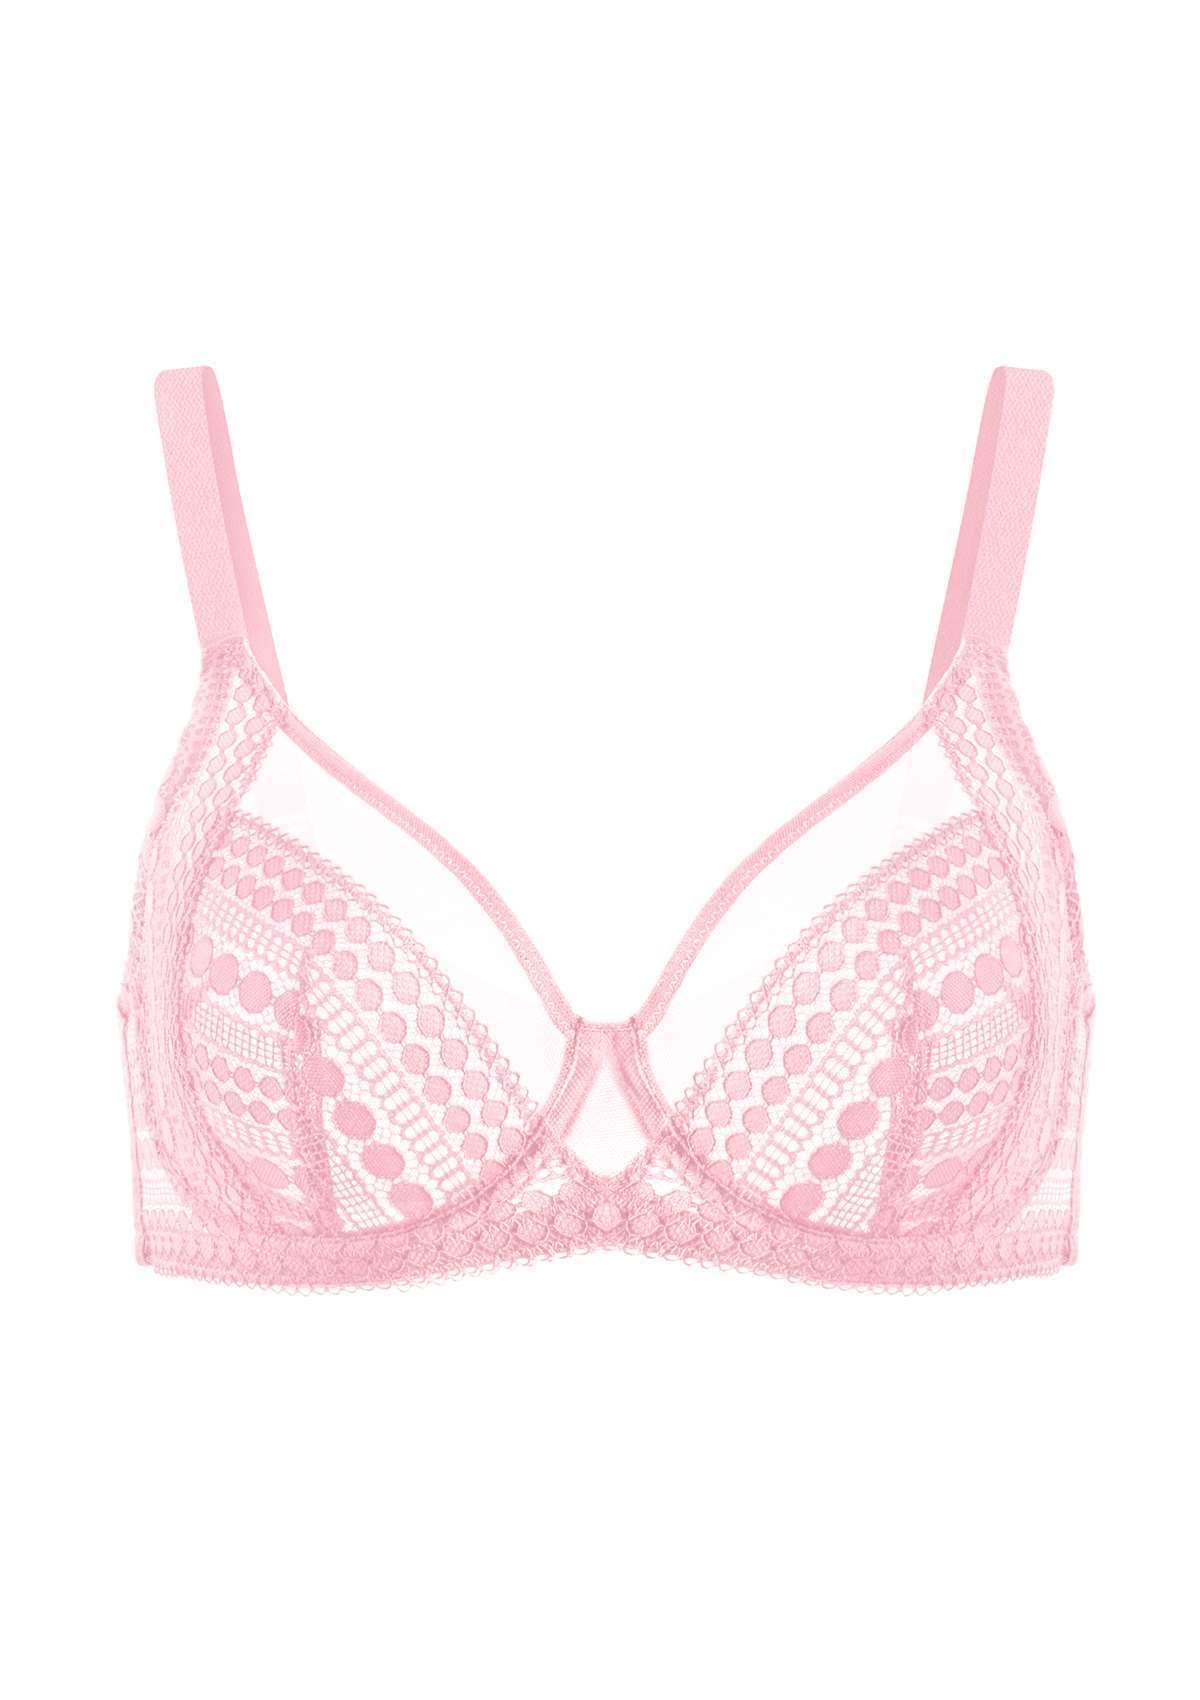 HSIA Heroine Lace Bra And Panties Set: Most Comfortable Supportive Bra - Pink / 38 / D